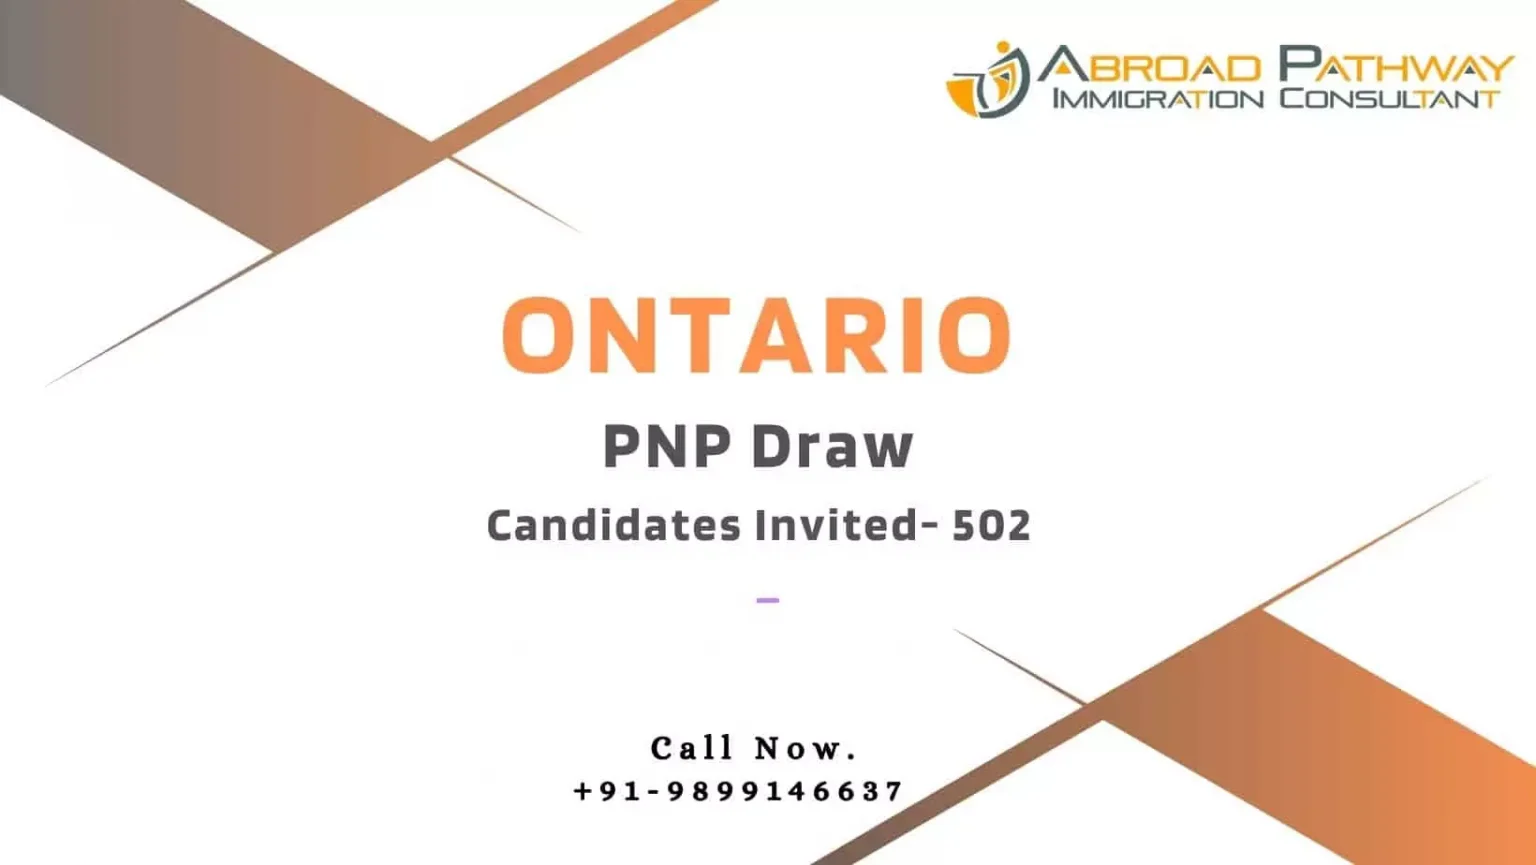 Ontario PNP Draw invites 502 Express Entry candidates